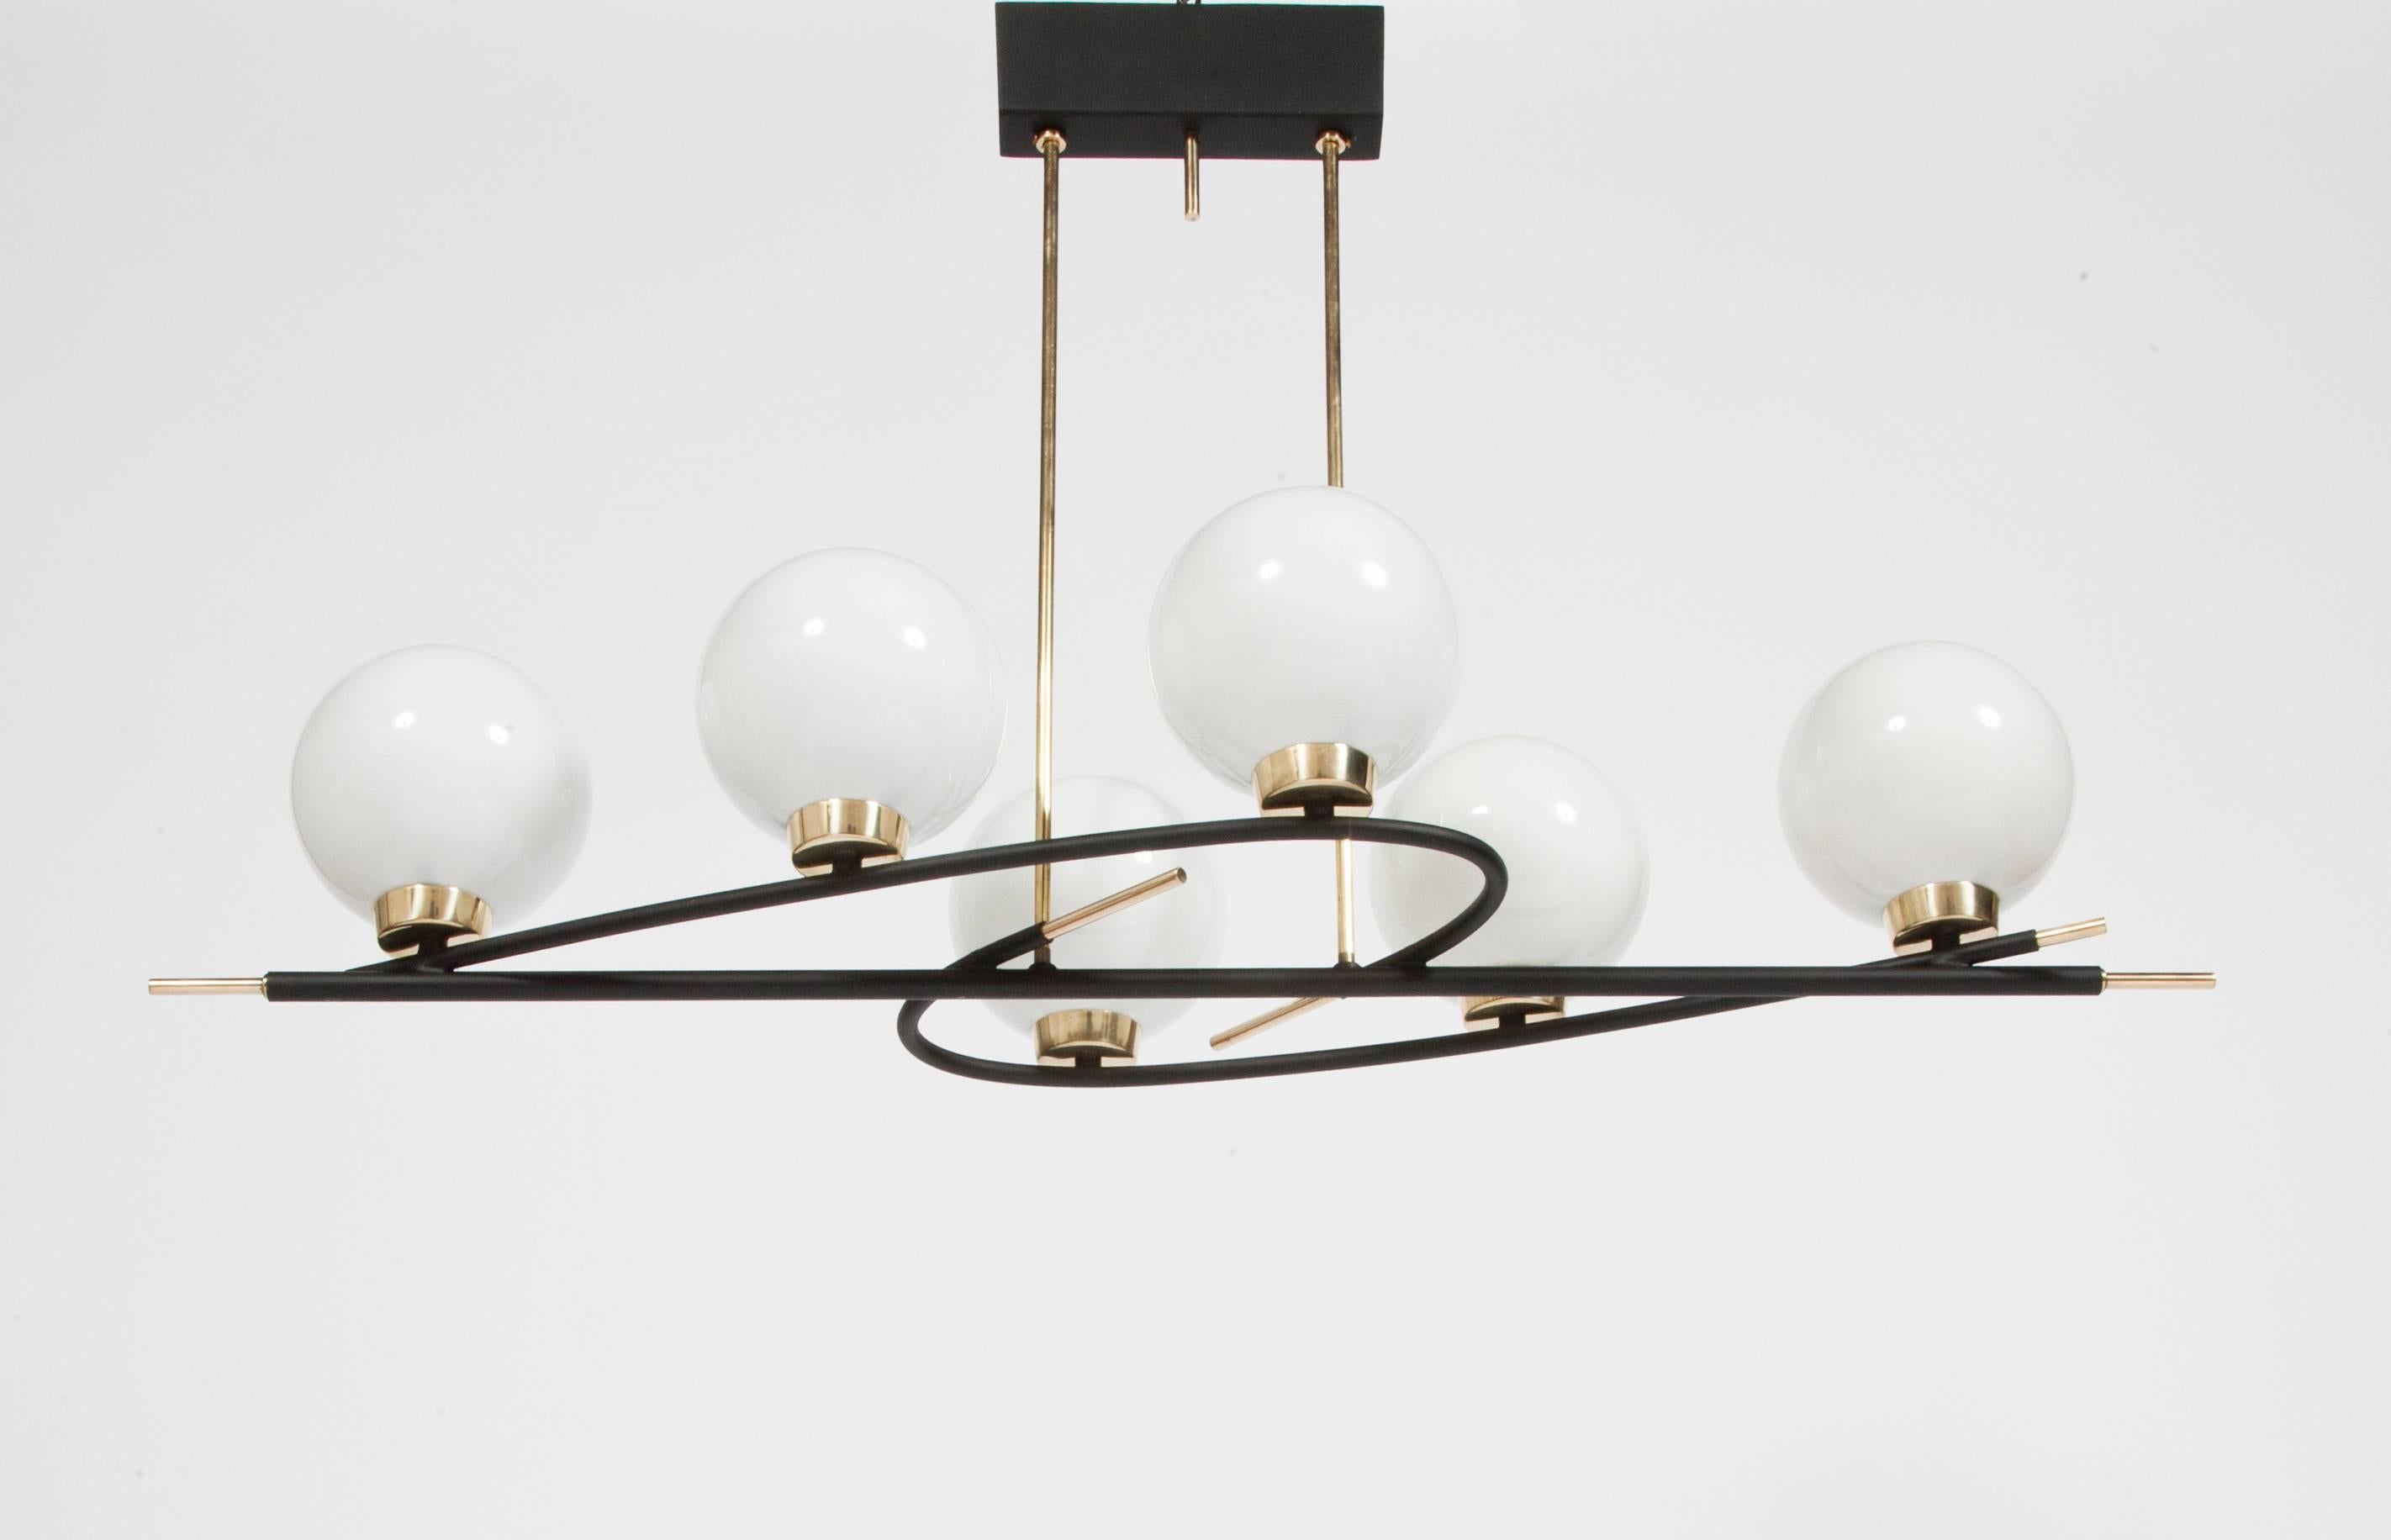 An elegant 1950s suspension light with six opaline glass shades resting on a twisted metal frame in painted metal and brass.